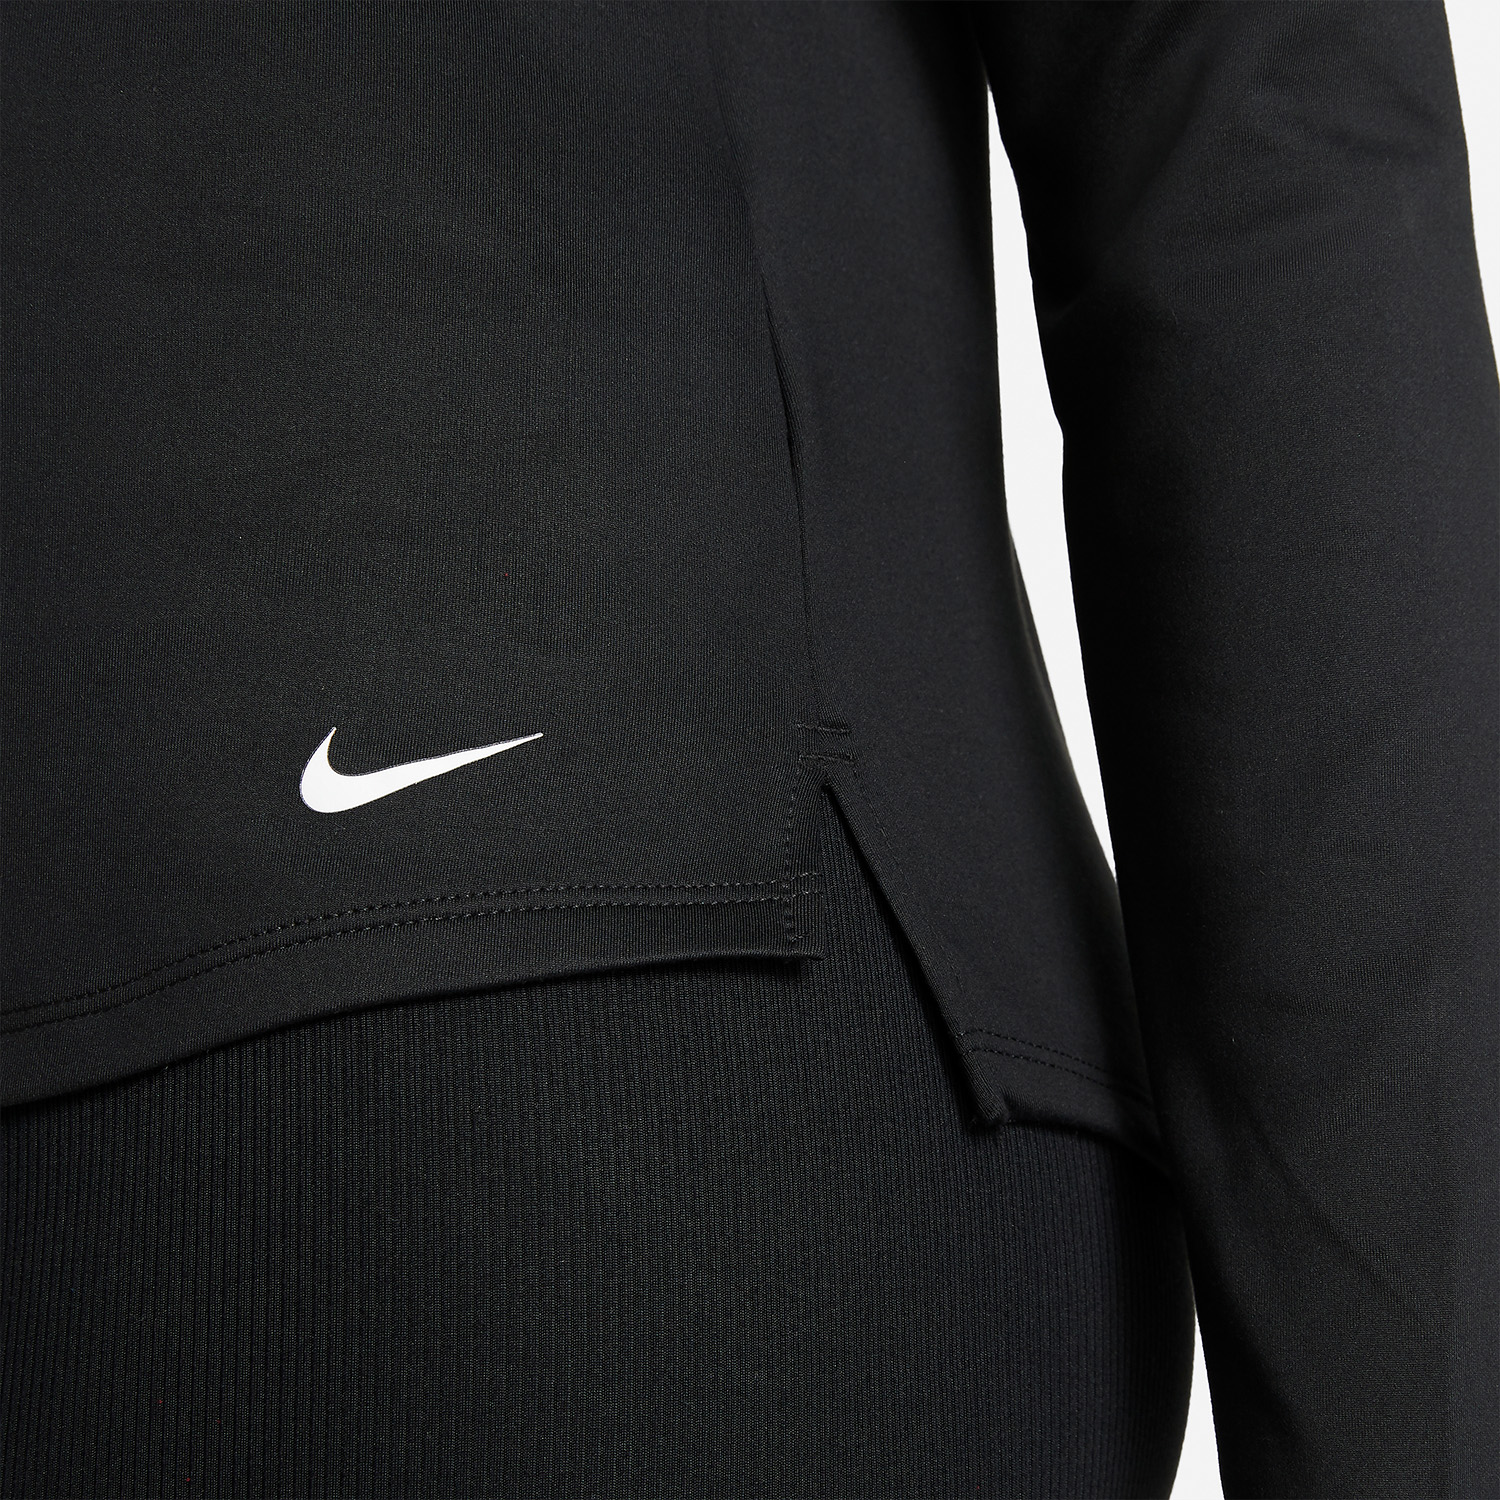 Nike Therma-FIT One Shirt - Black/White